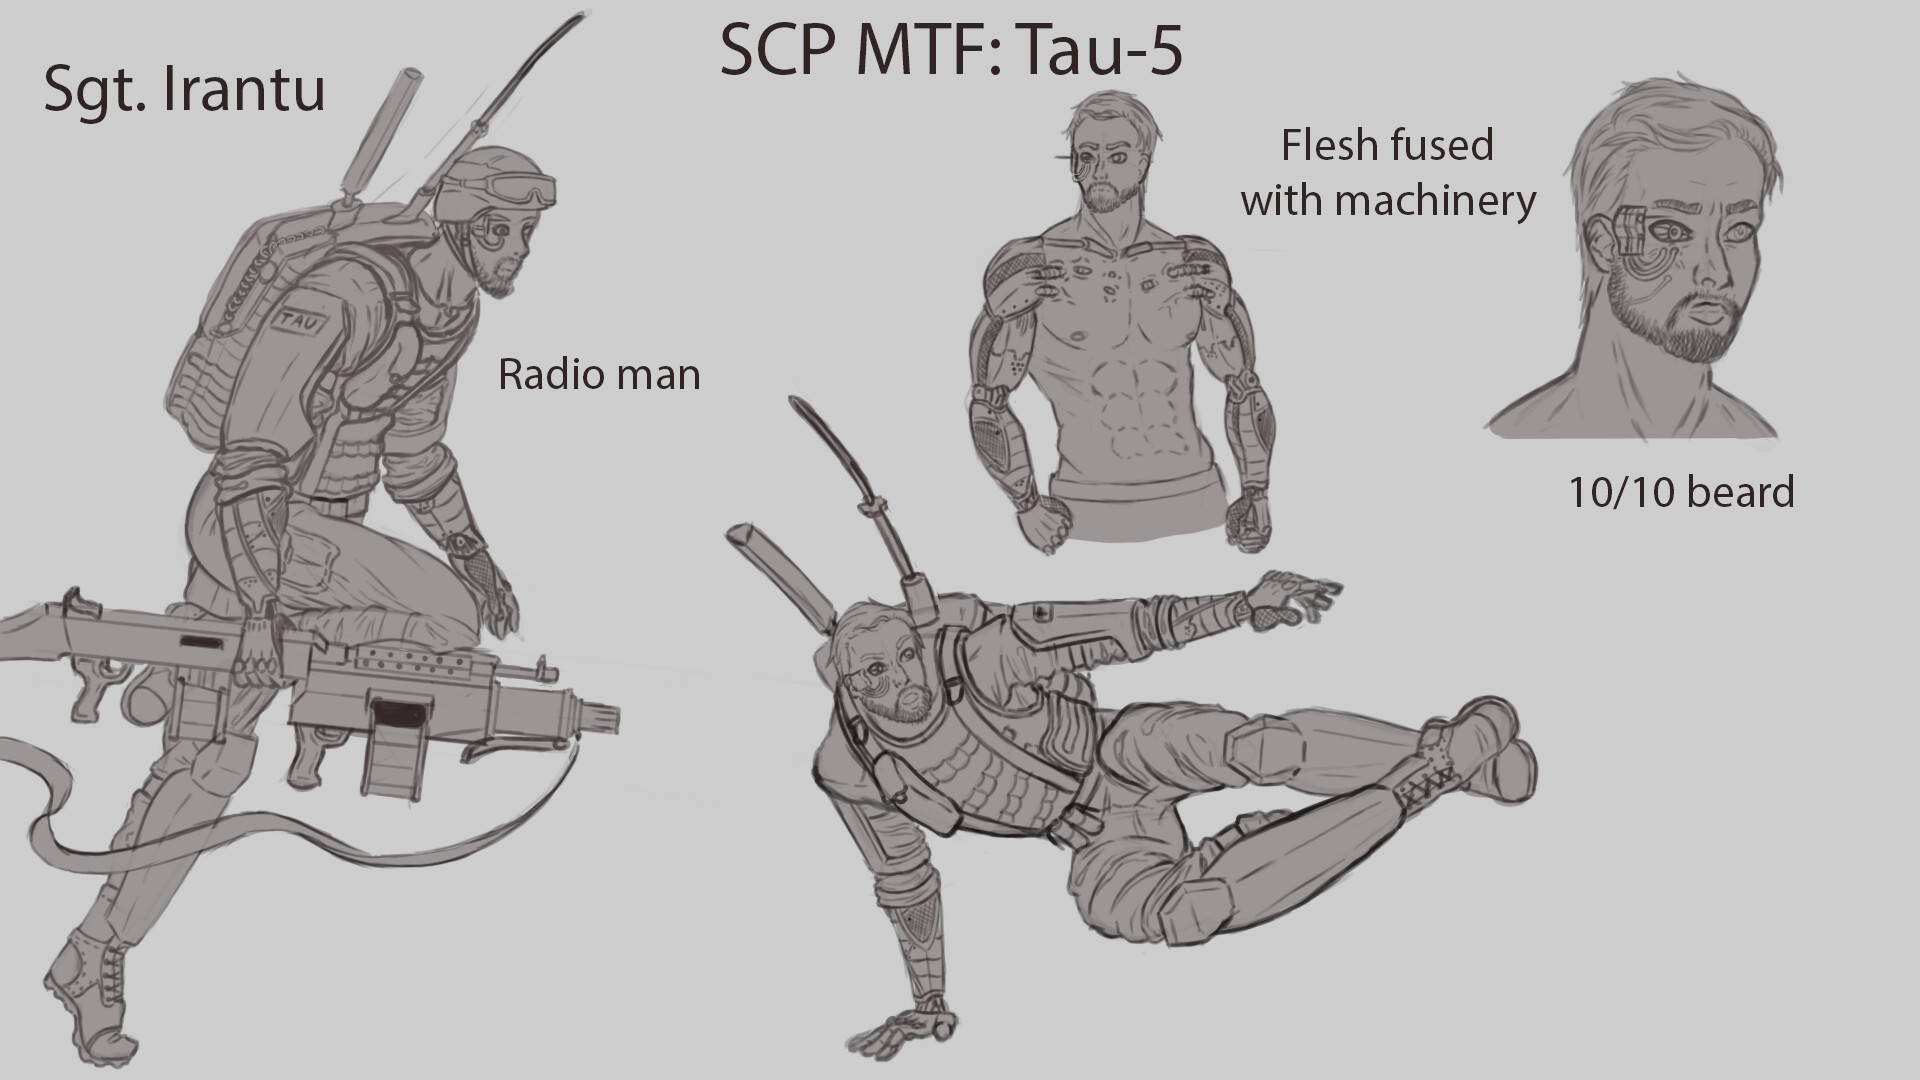 For this one I wanted to focus a bit more on the cyborg parts of tau-5 as a...